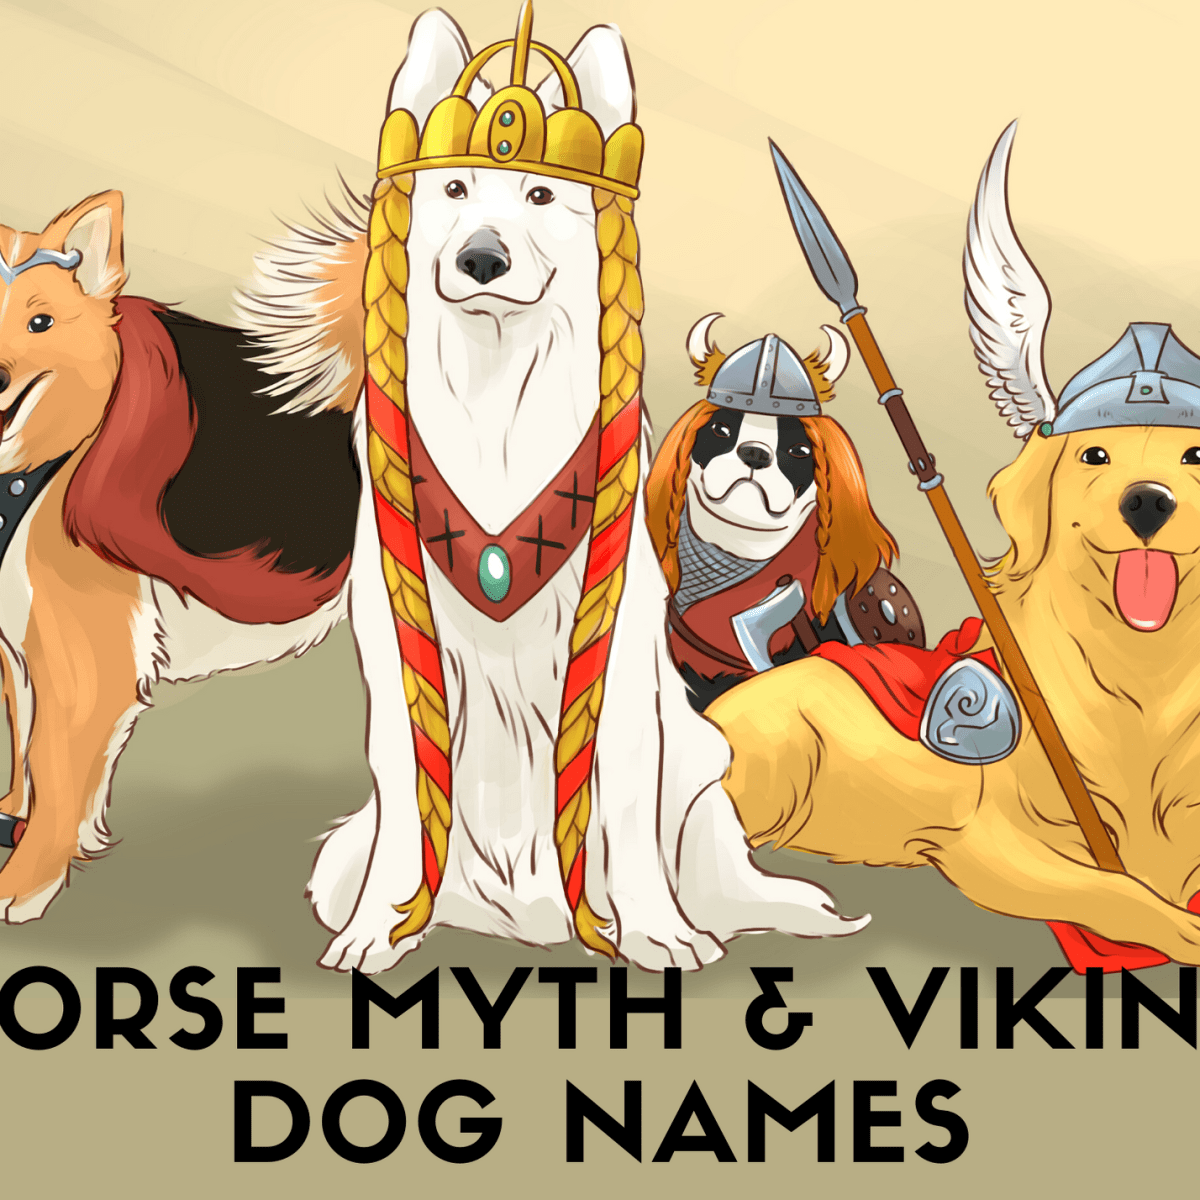 50 Norse Mythology And Viking Dog Names Pethelpful By Fellow Animal Lovers And Experts